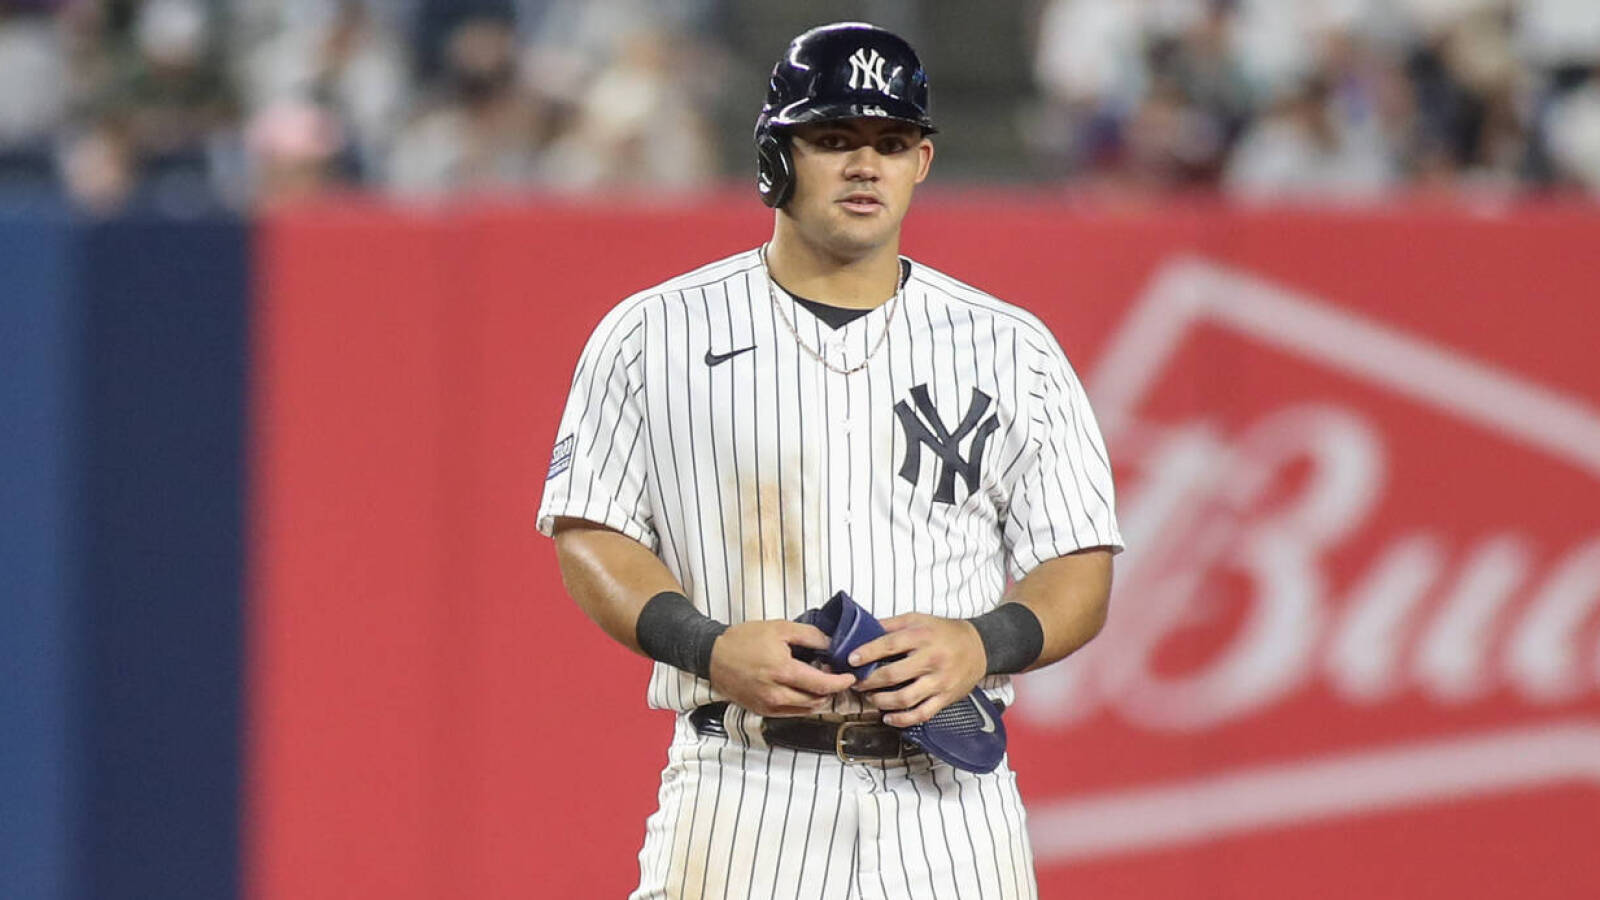 Yankees outfielder to undergo Tommy John surgery